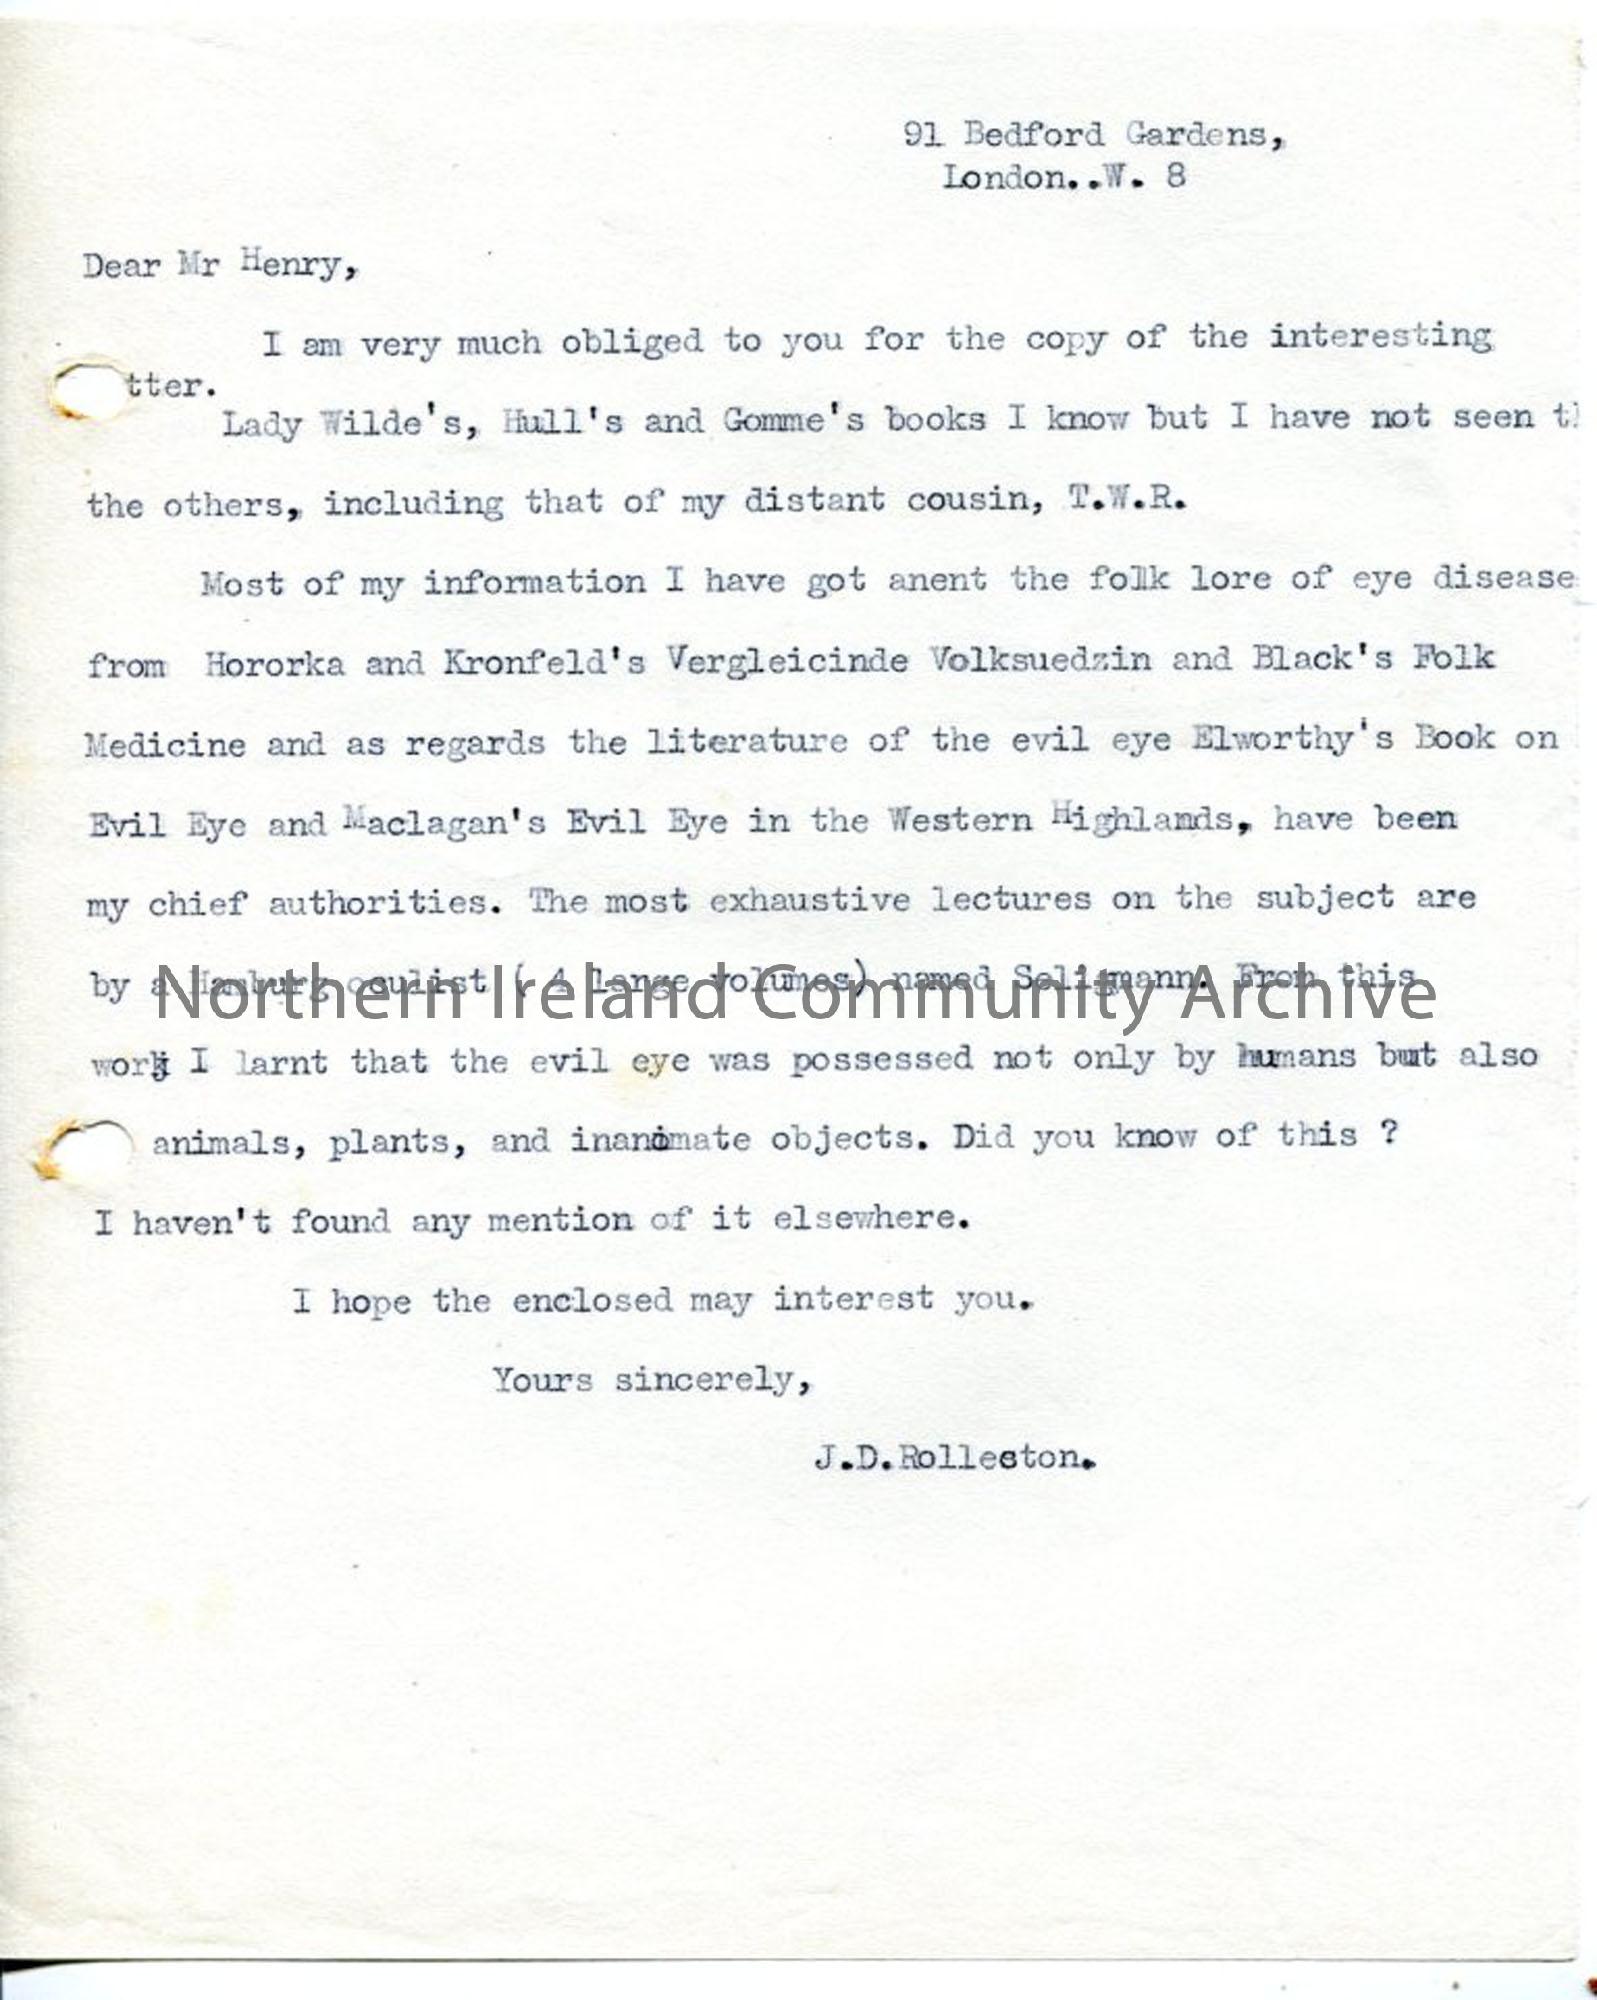 Typed letter from J.D Rolleston to Sam Henry